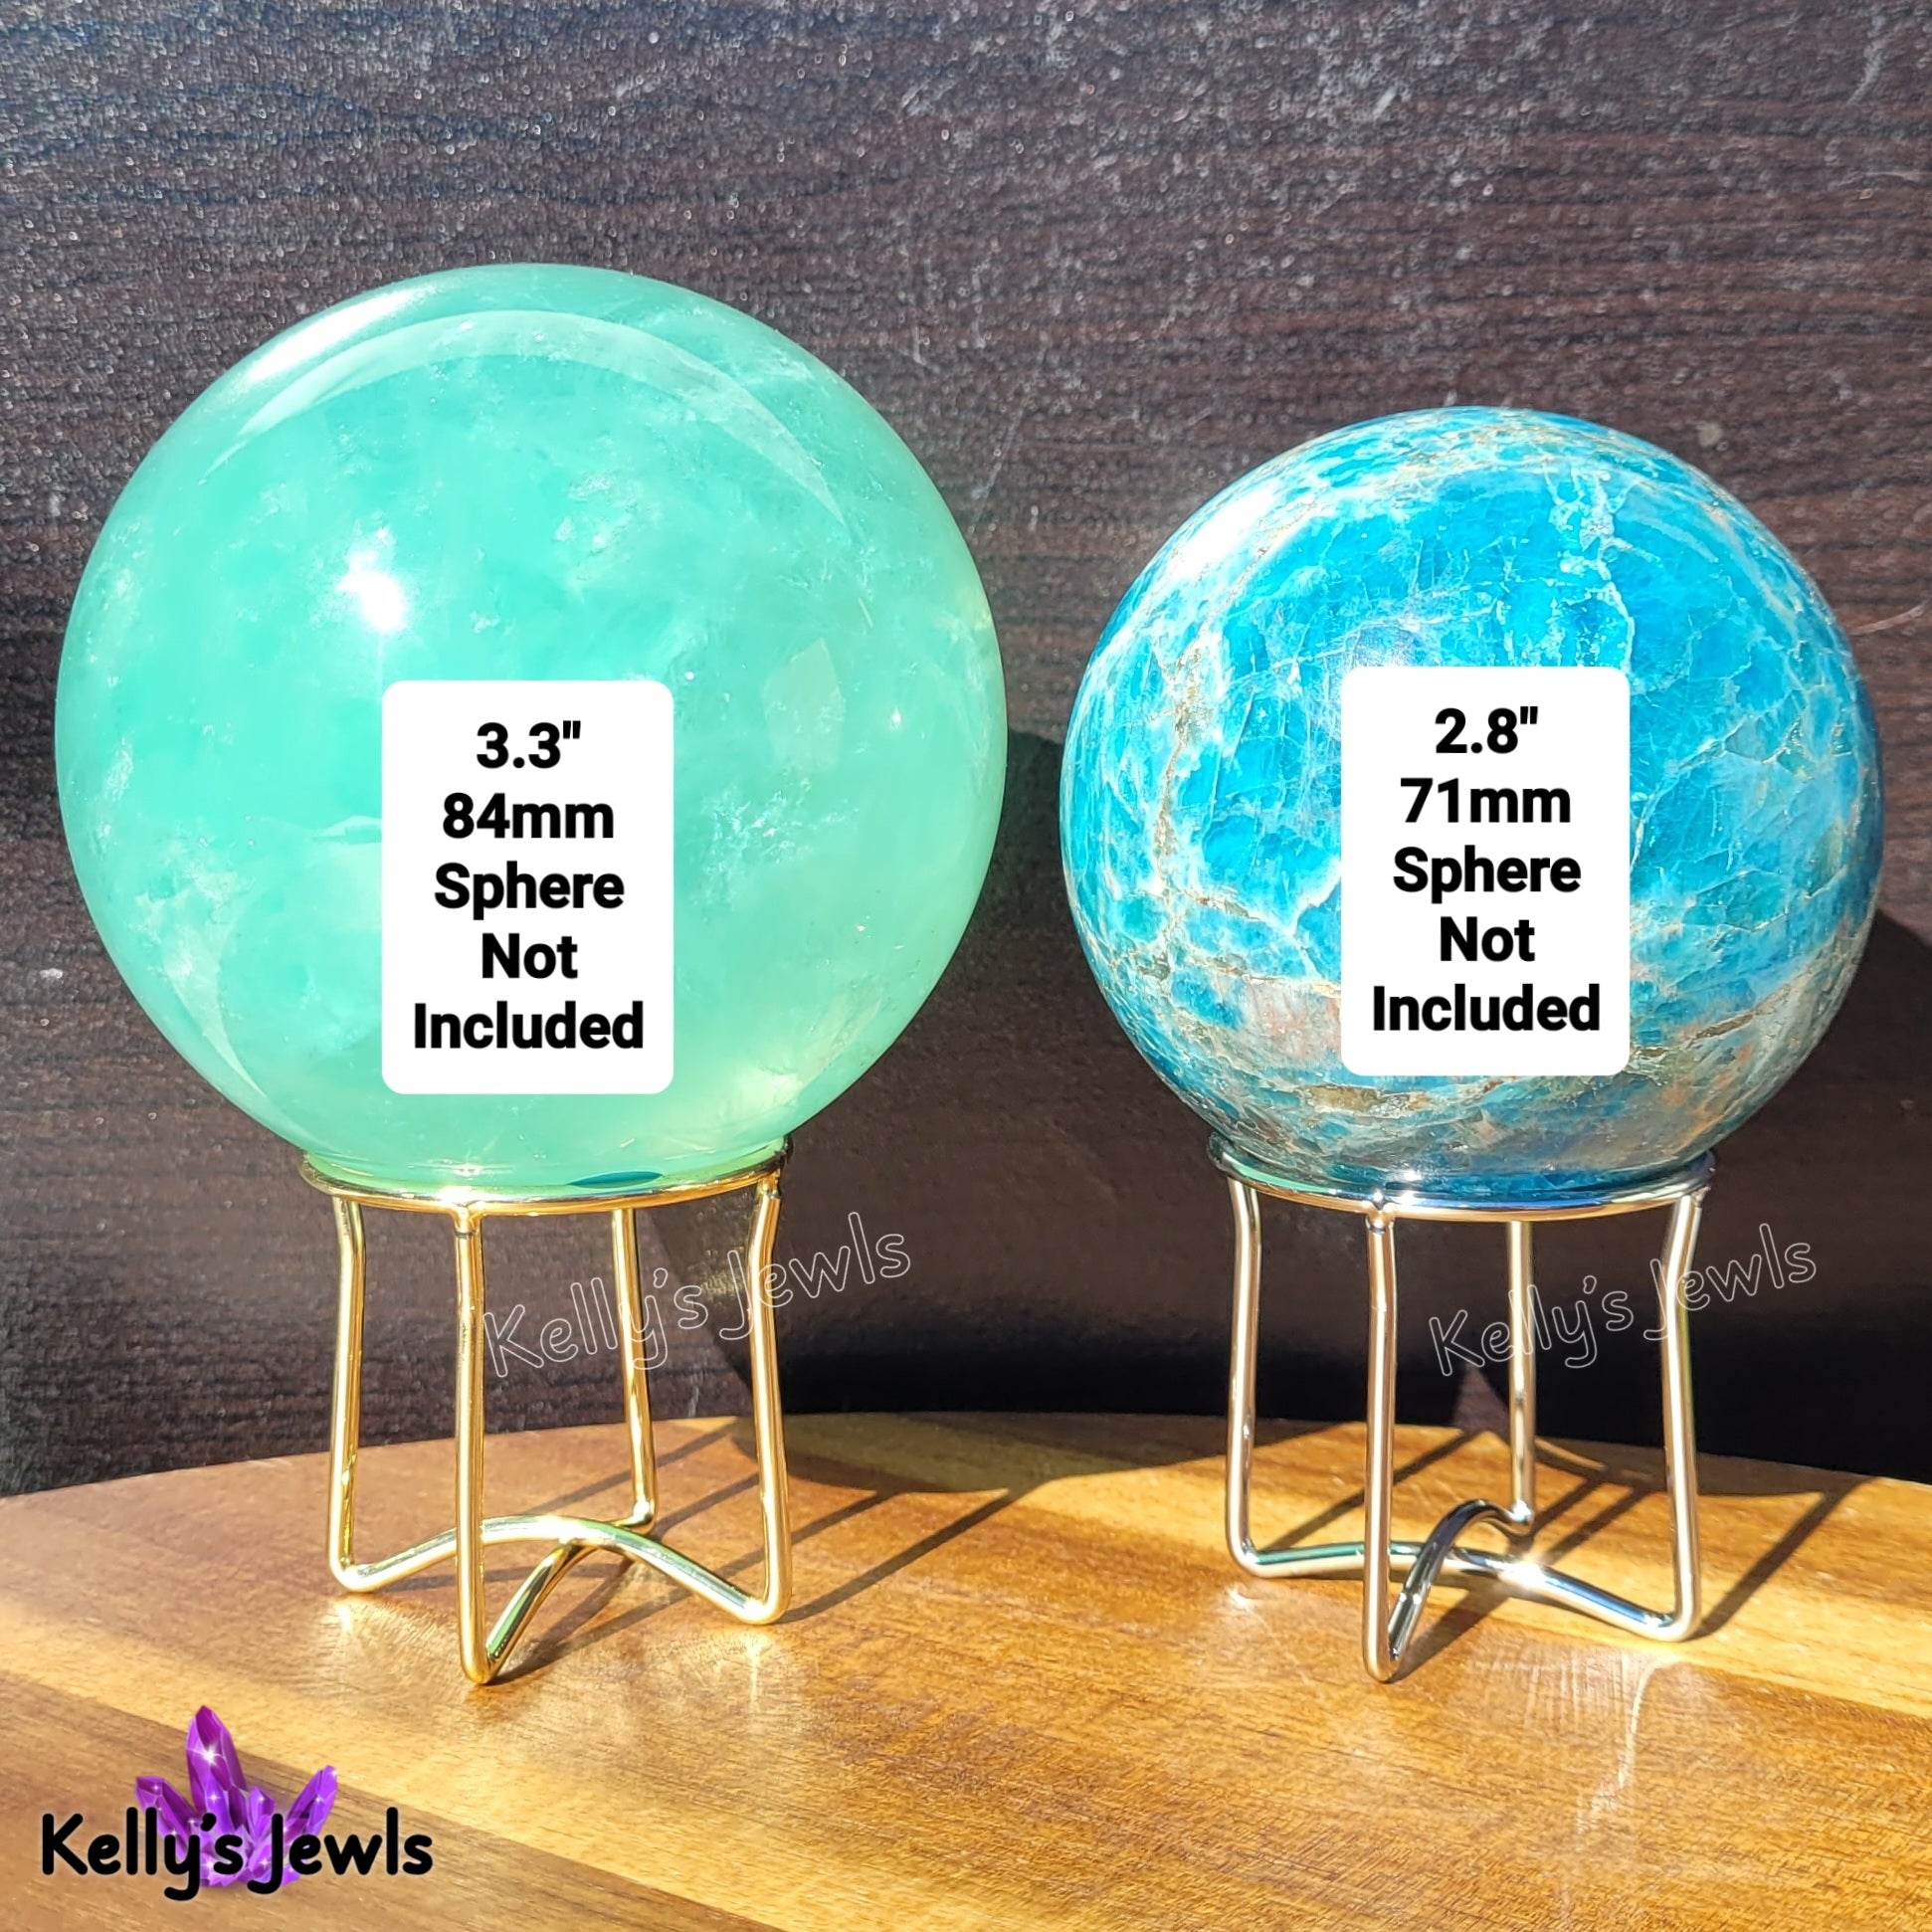 Simple Metal Sphere Display Stand in Silver or Gold for Spheres 1.9" to 4"